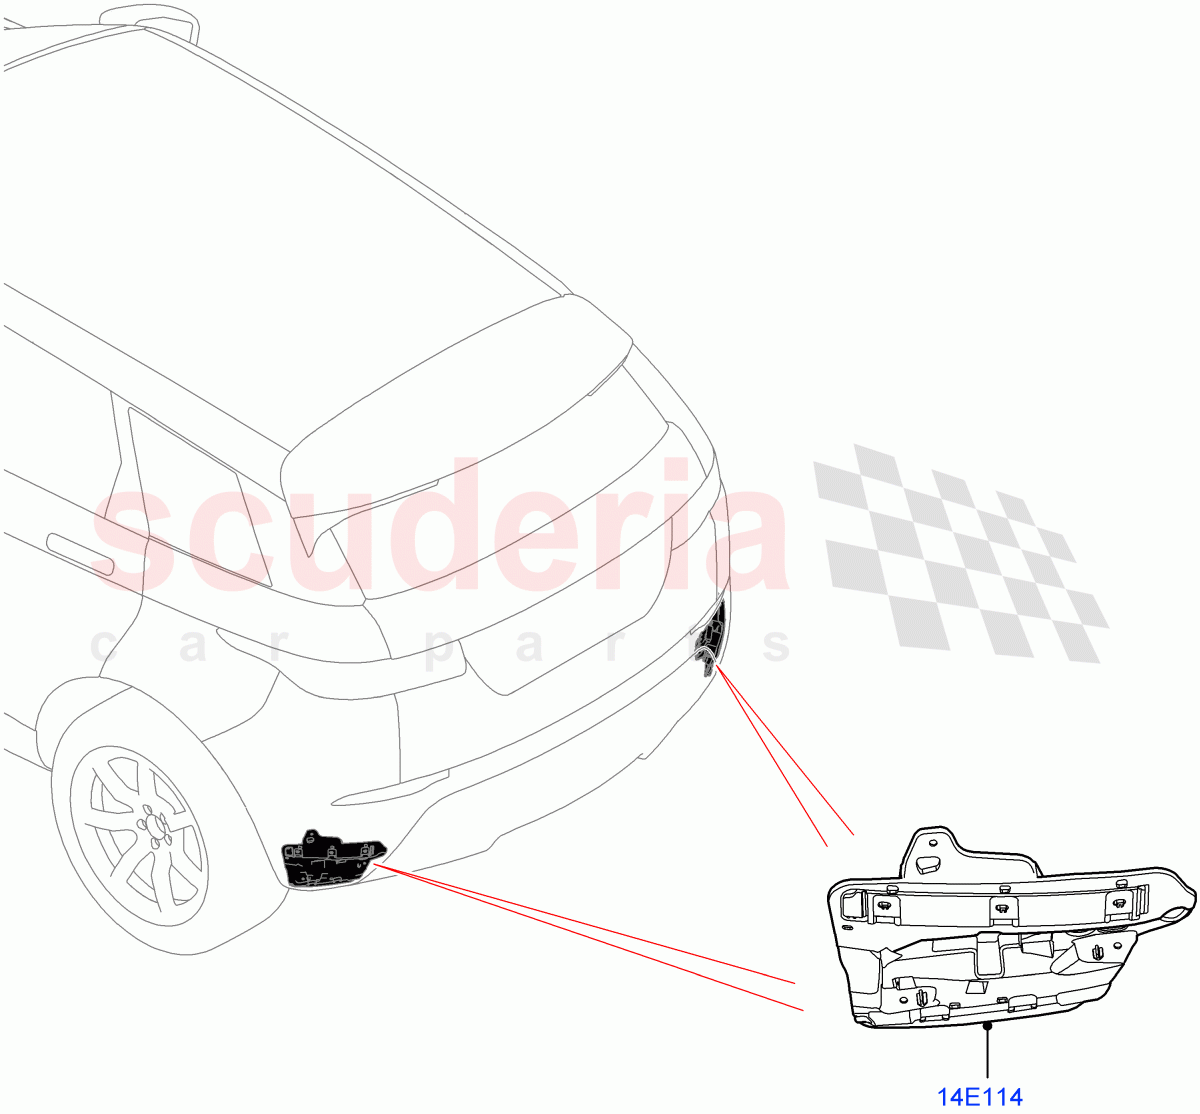 Vehicle Modules And Sensors(Tailgate - Hands Free,Changsu (China)) of Land Rover Land Rover Range Rover Evoque (2019+) [2.0 Turbo Diesel AJ21D4]